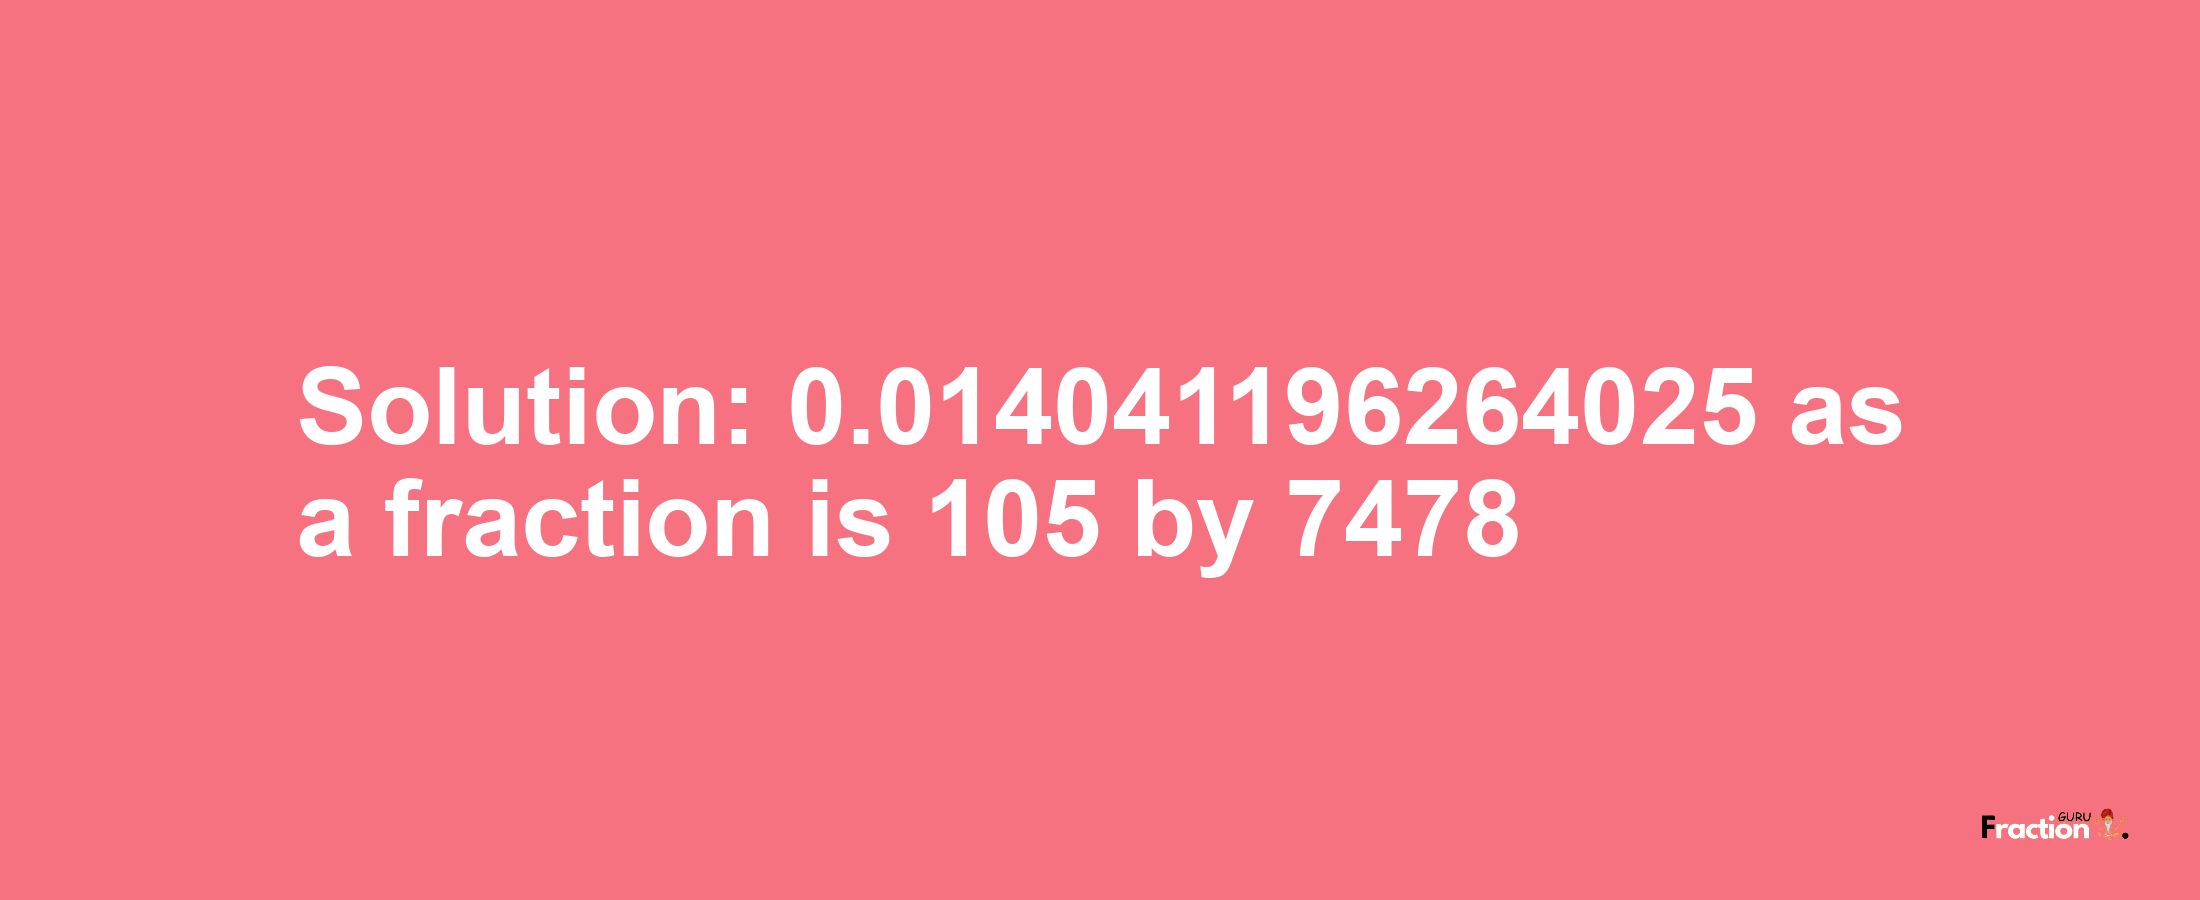 Solution:0.014041196264025 as a fraction is 105/7478